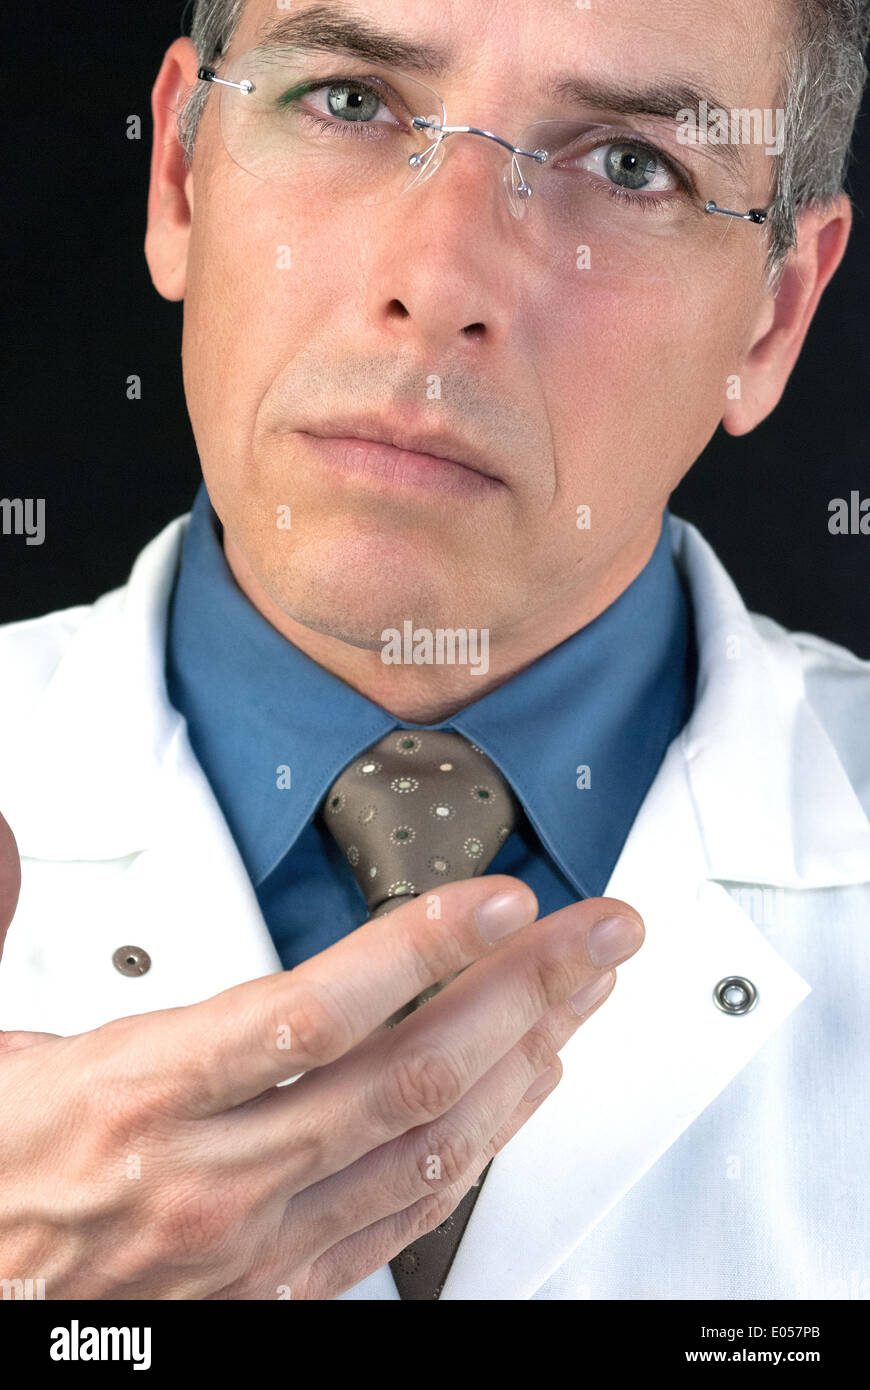 Close-up of a Doctor expressing concern. Stock Photo